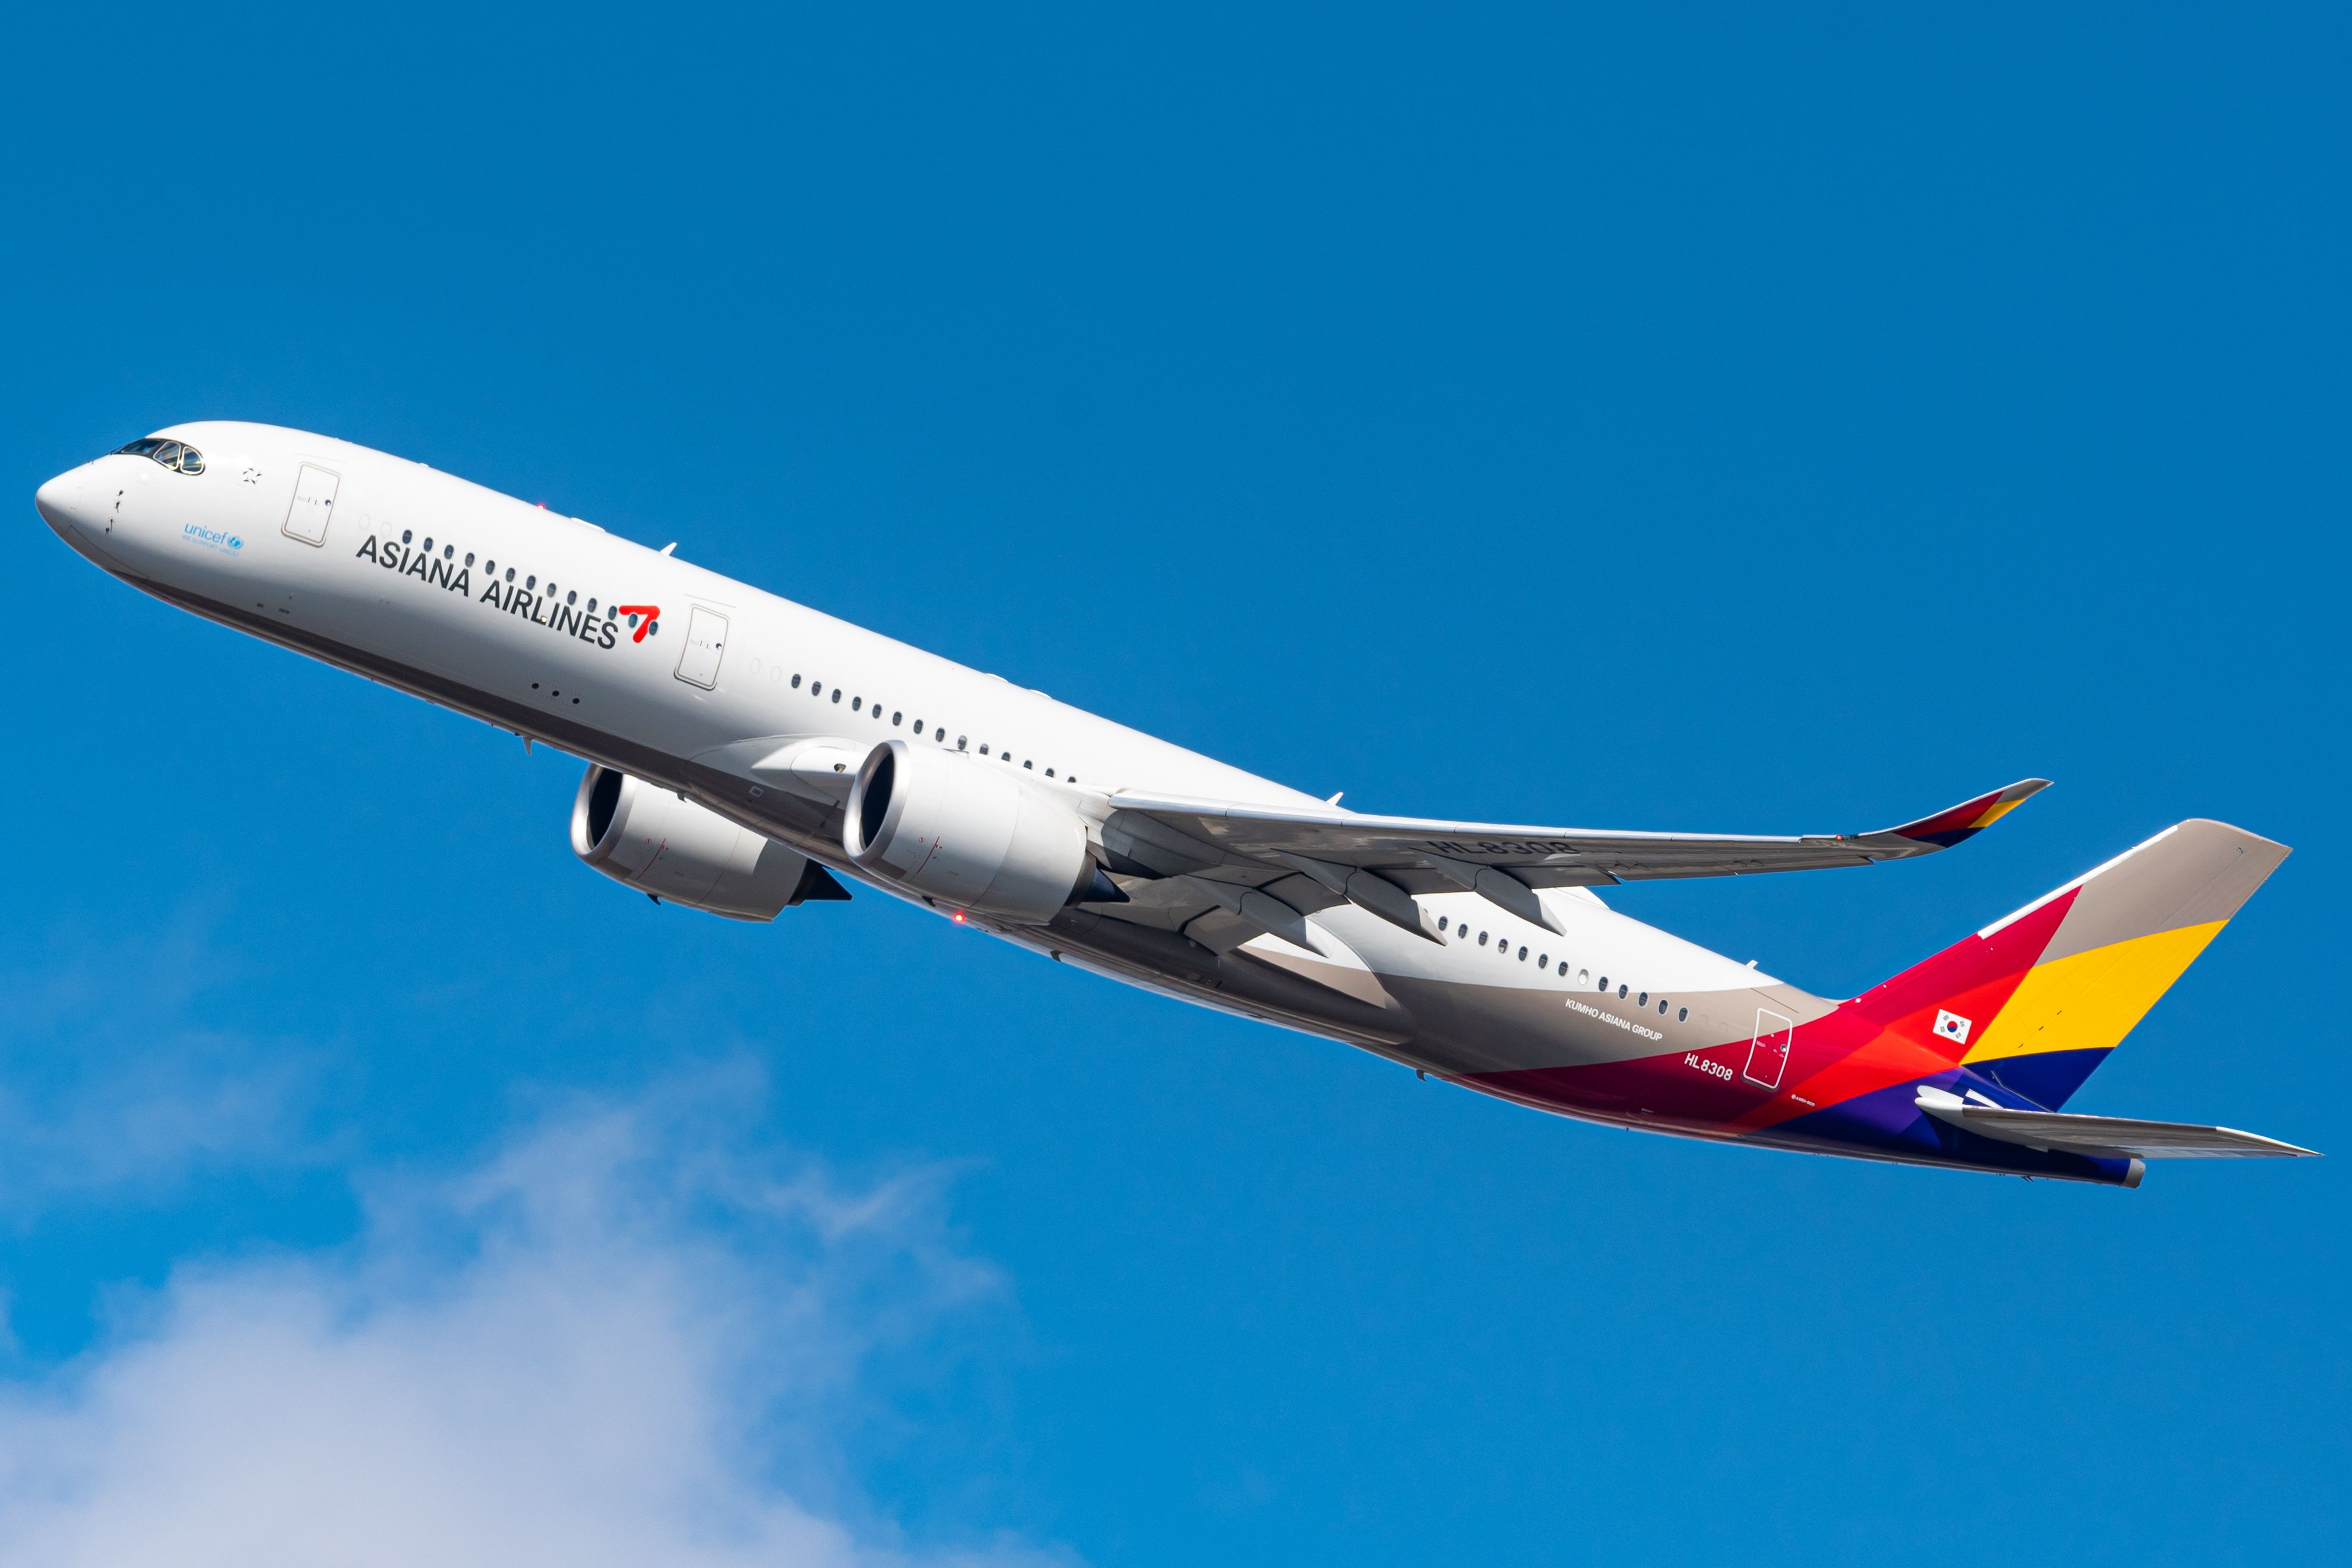 Asiana Airlines Airbus A350-900 Taking Off